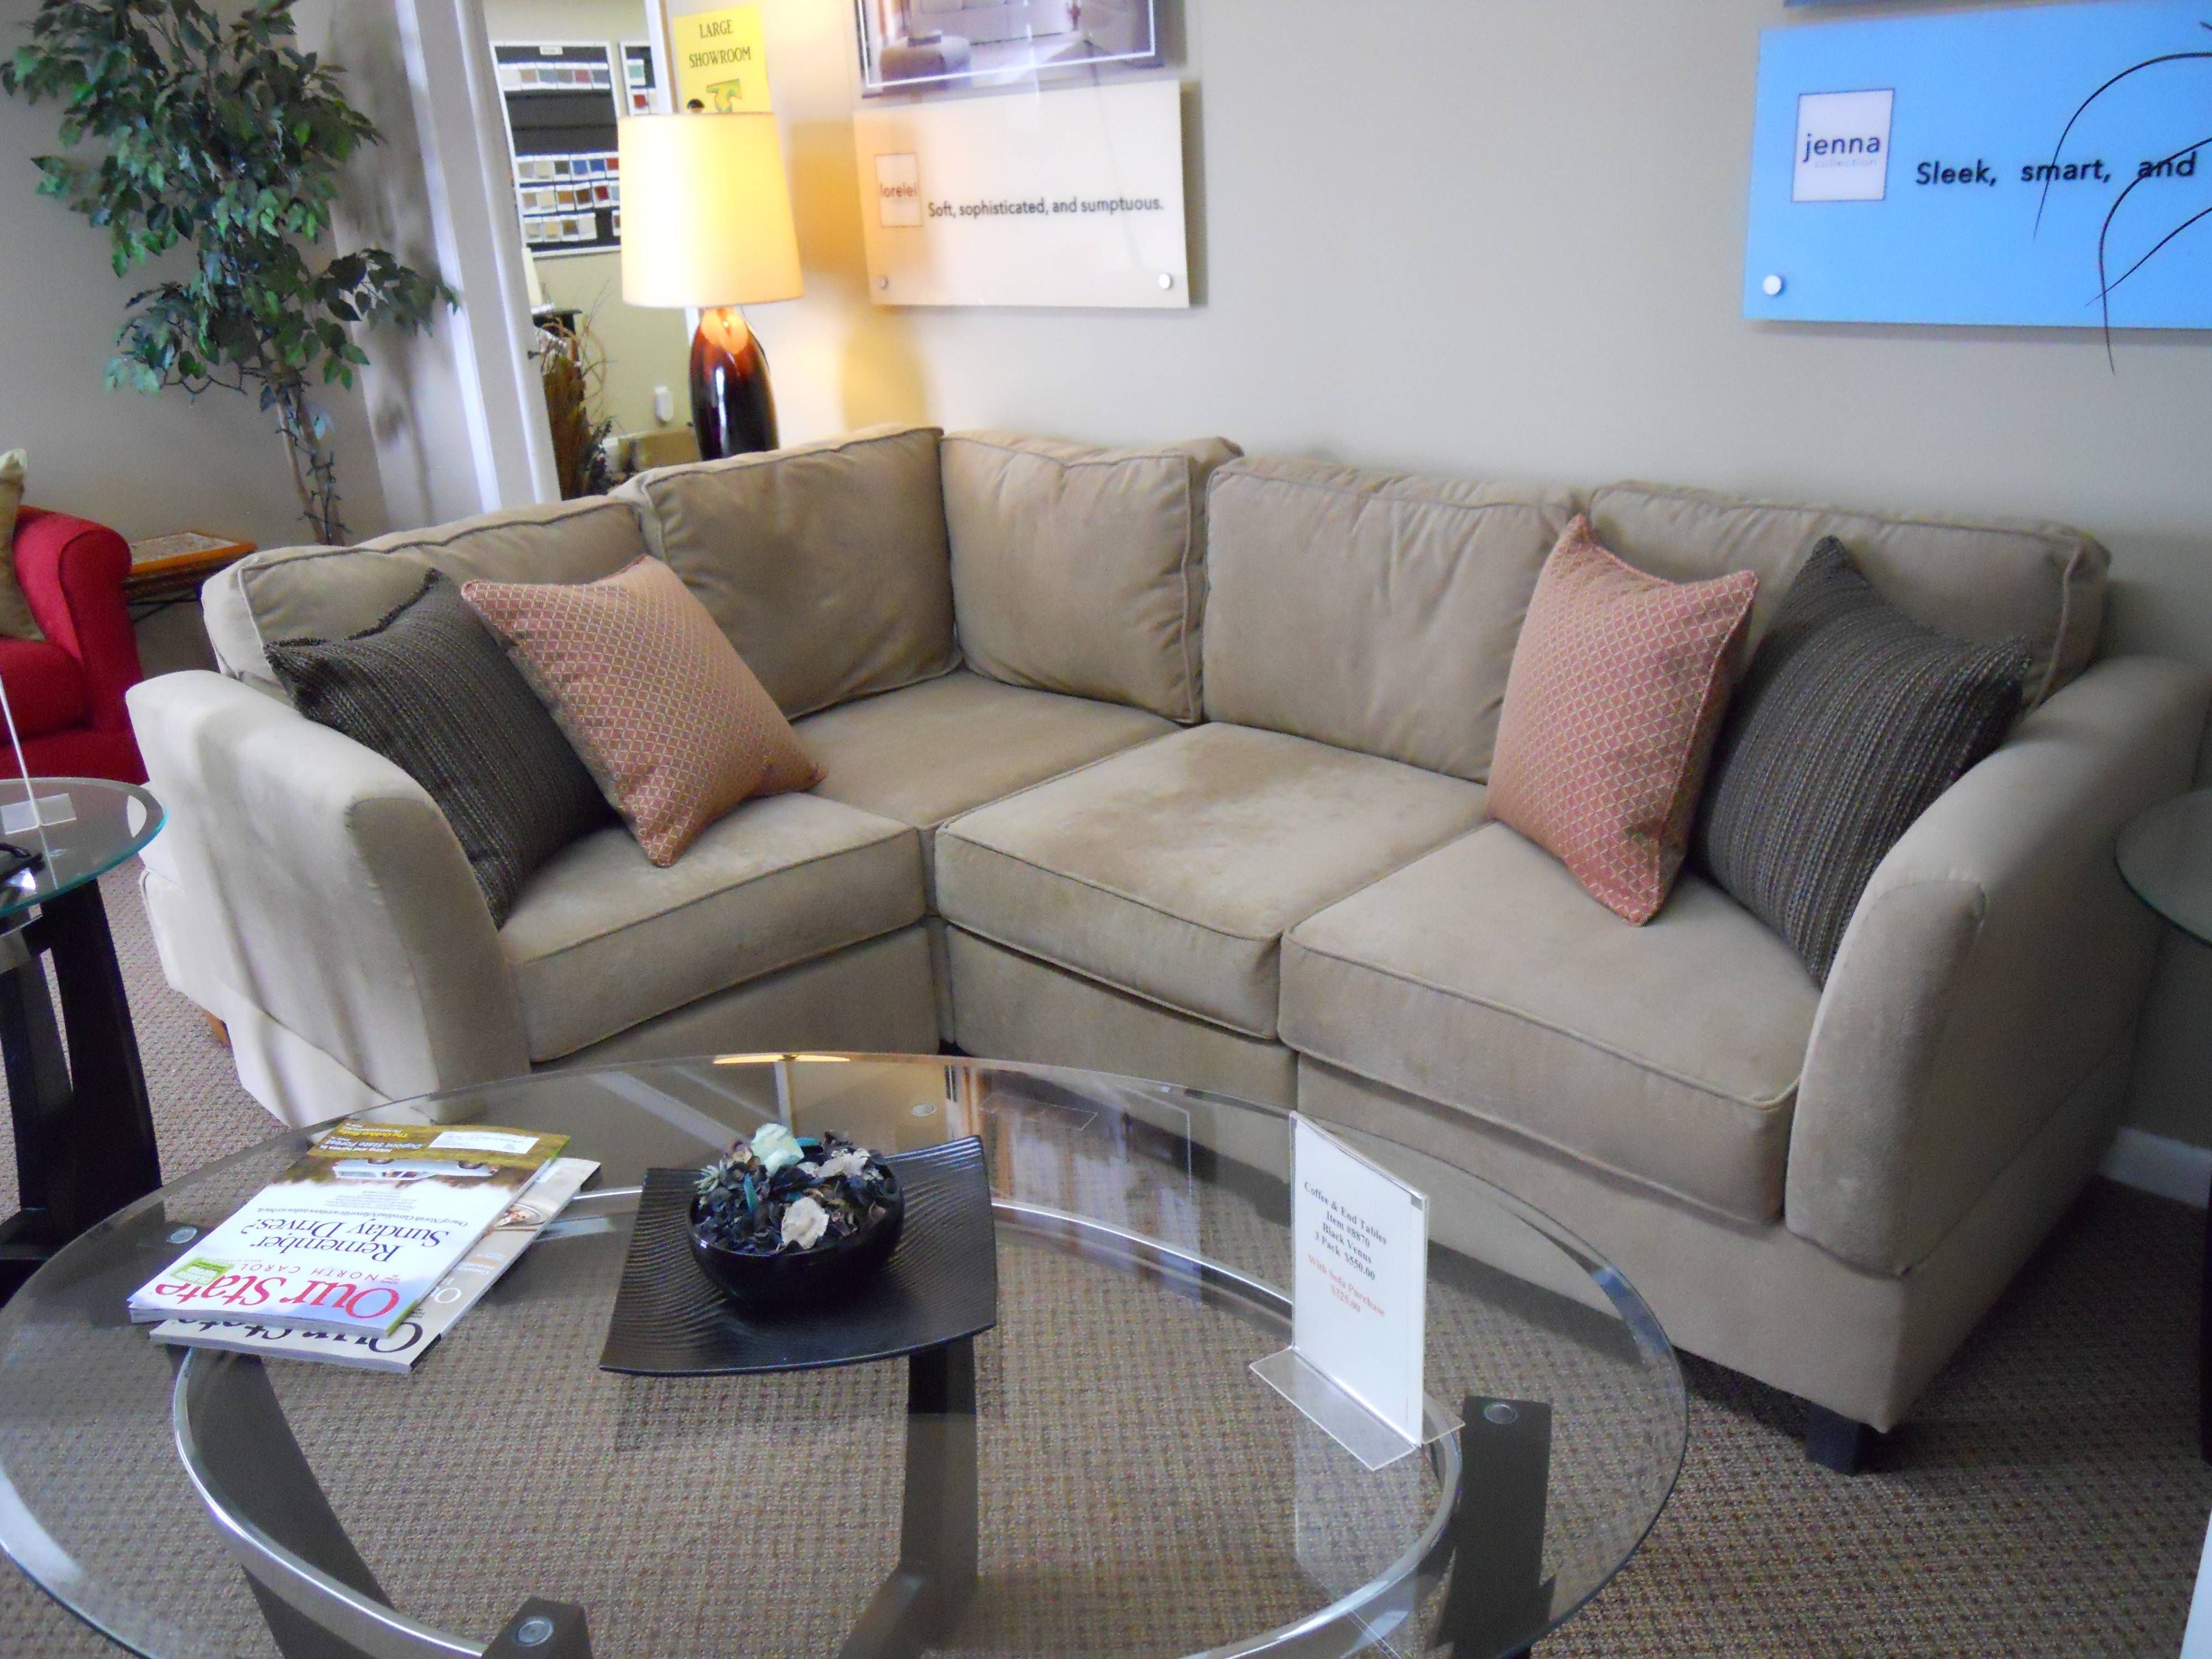 Wonderful Cheap Sectional Sofas For Small Spaces 34 With With Regard To Inexpensive Sectional Sofas For Small Spaces (View 15 of 30)